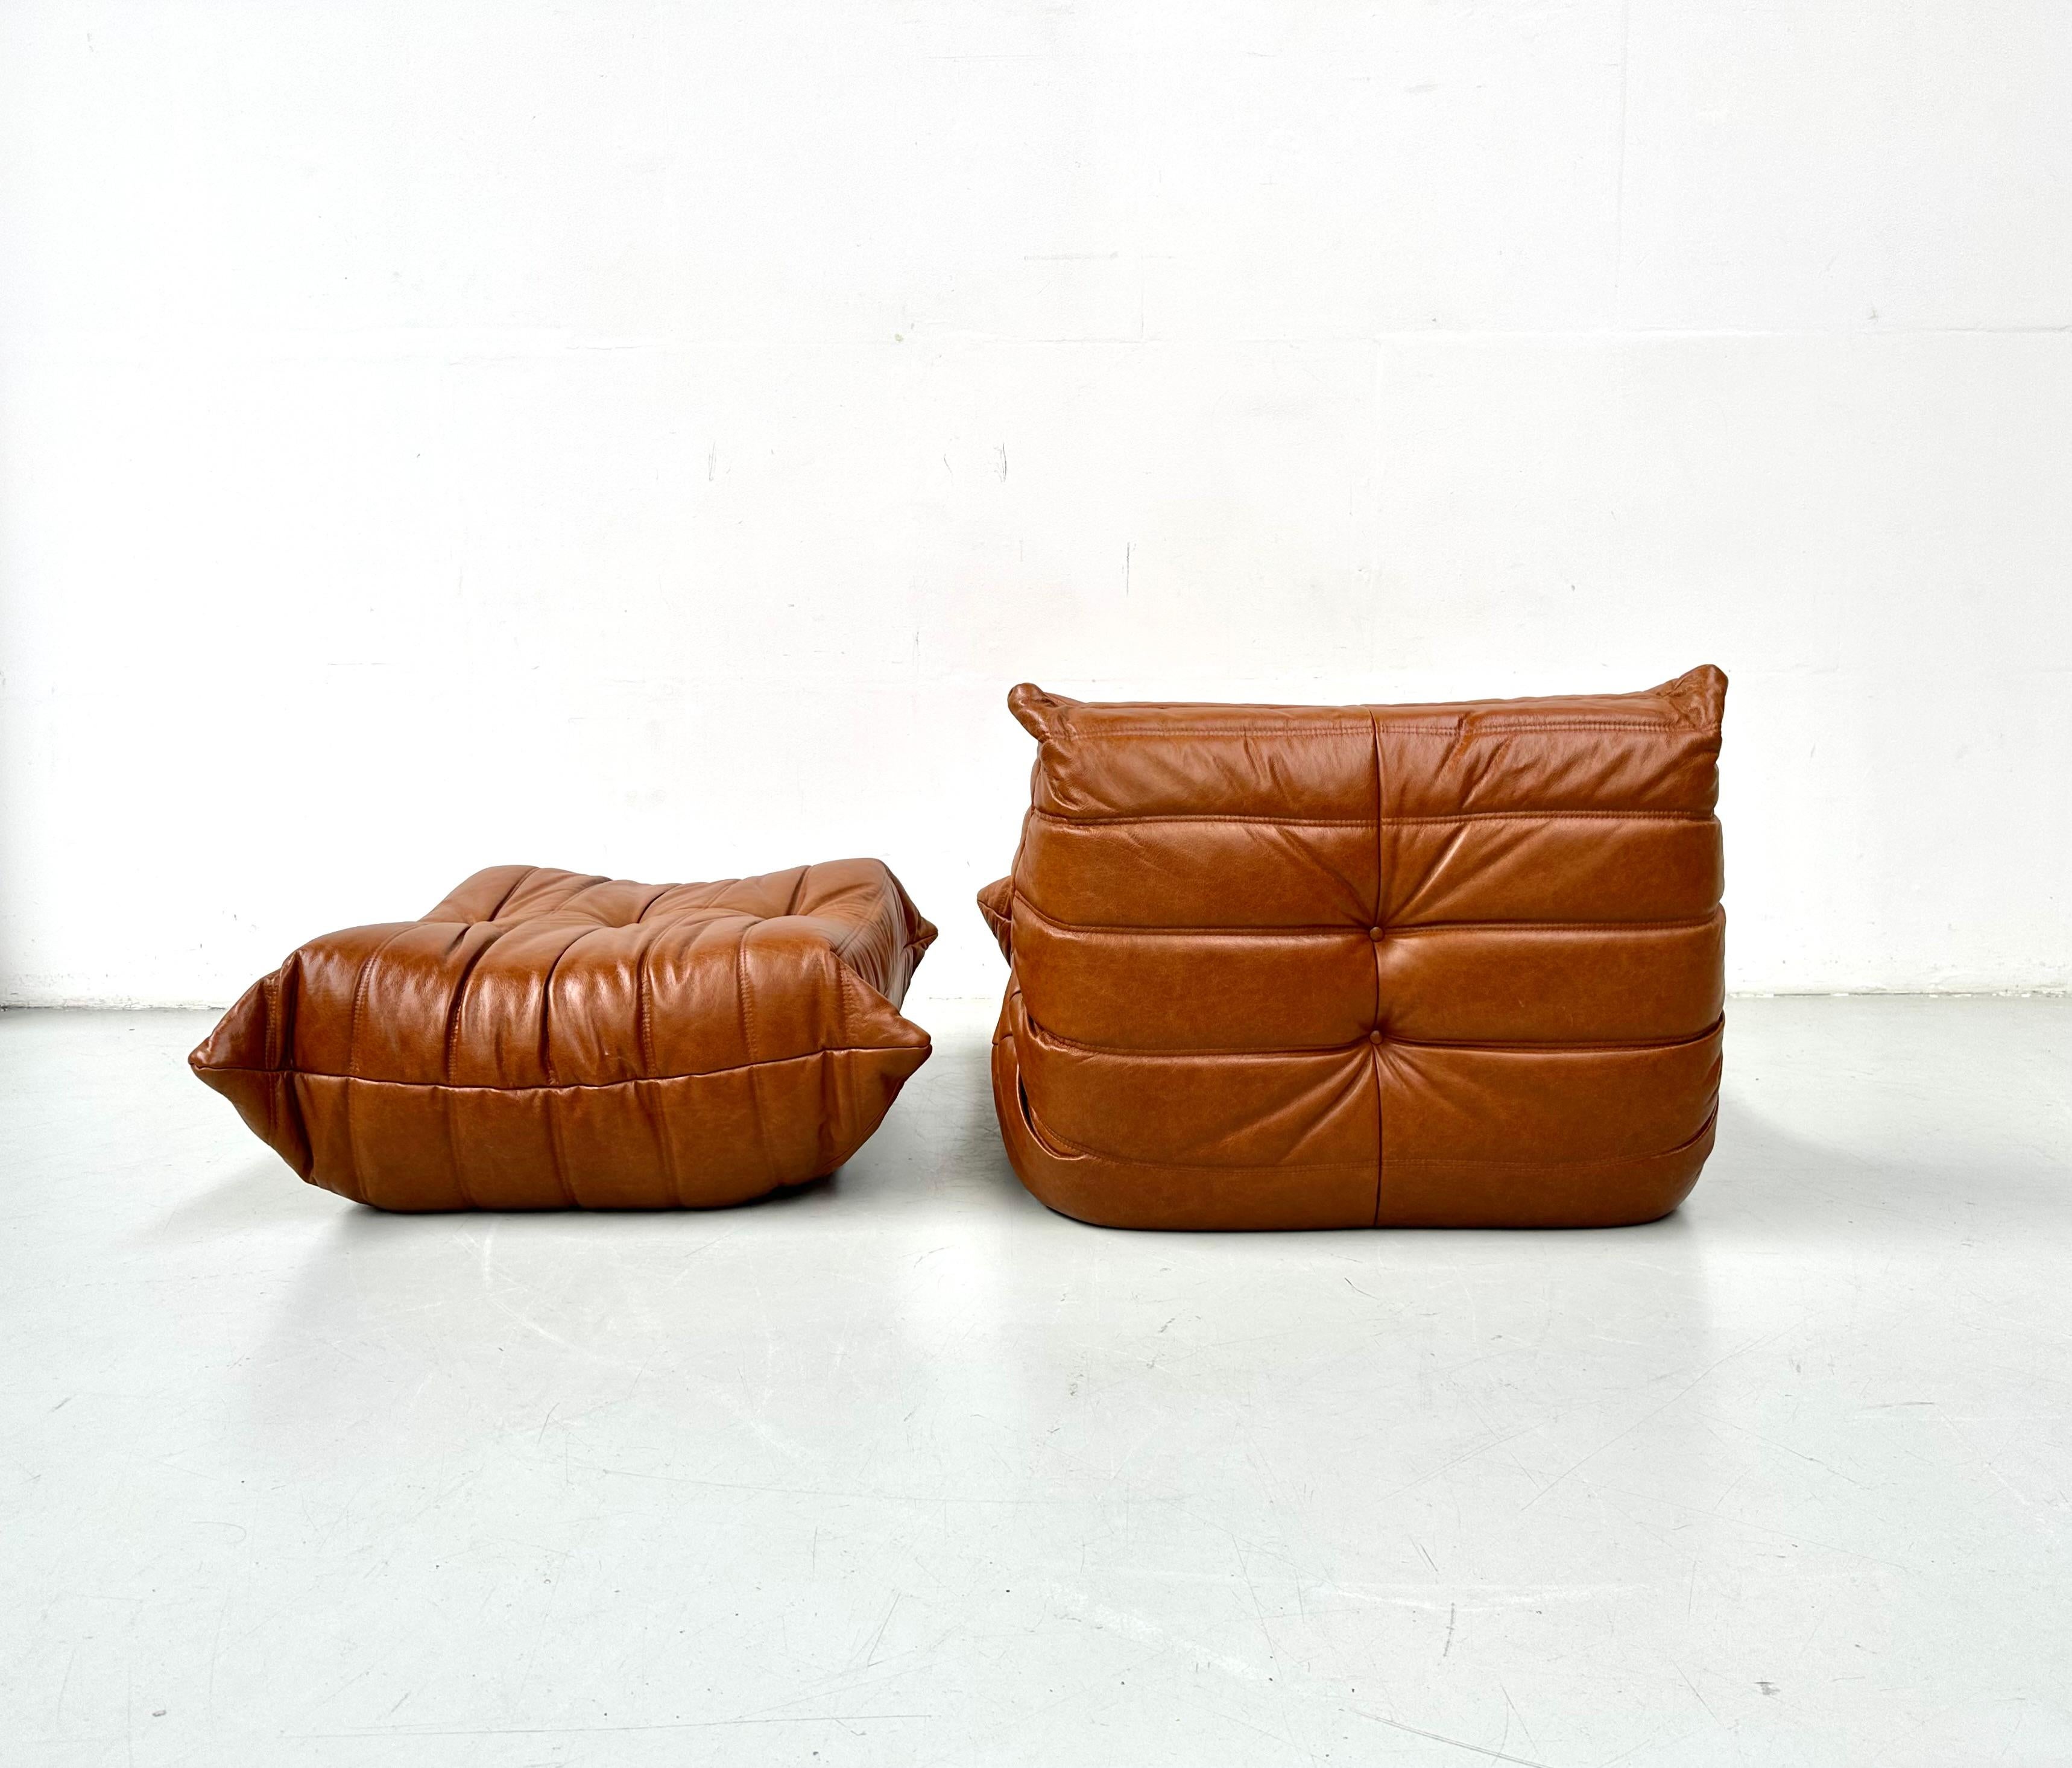 French Togo Chair and Ottoman in Cognac Leather by M. Ducaroy for Ligne Roset. For Sale 3